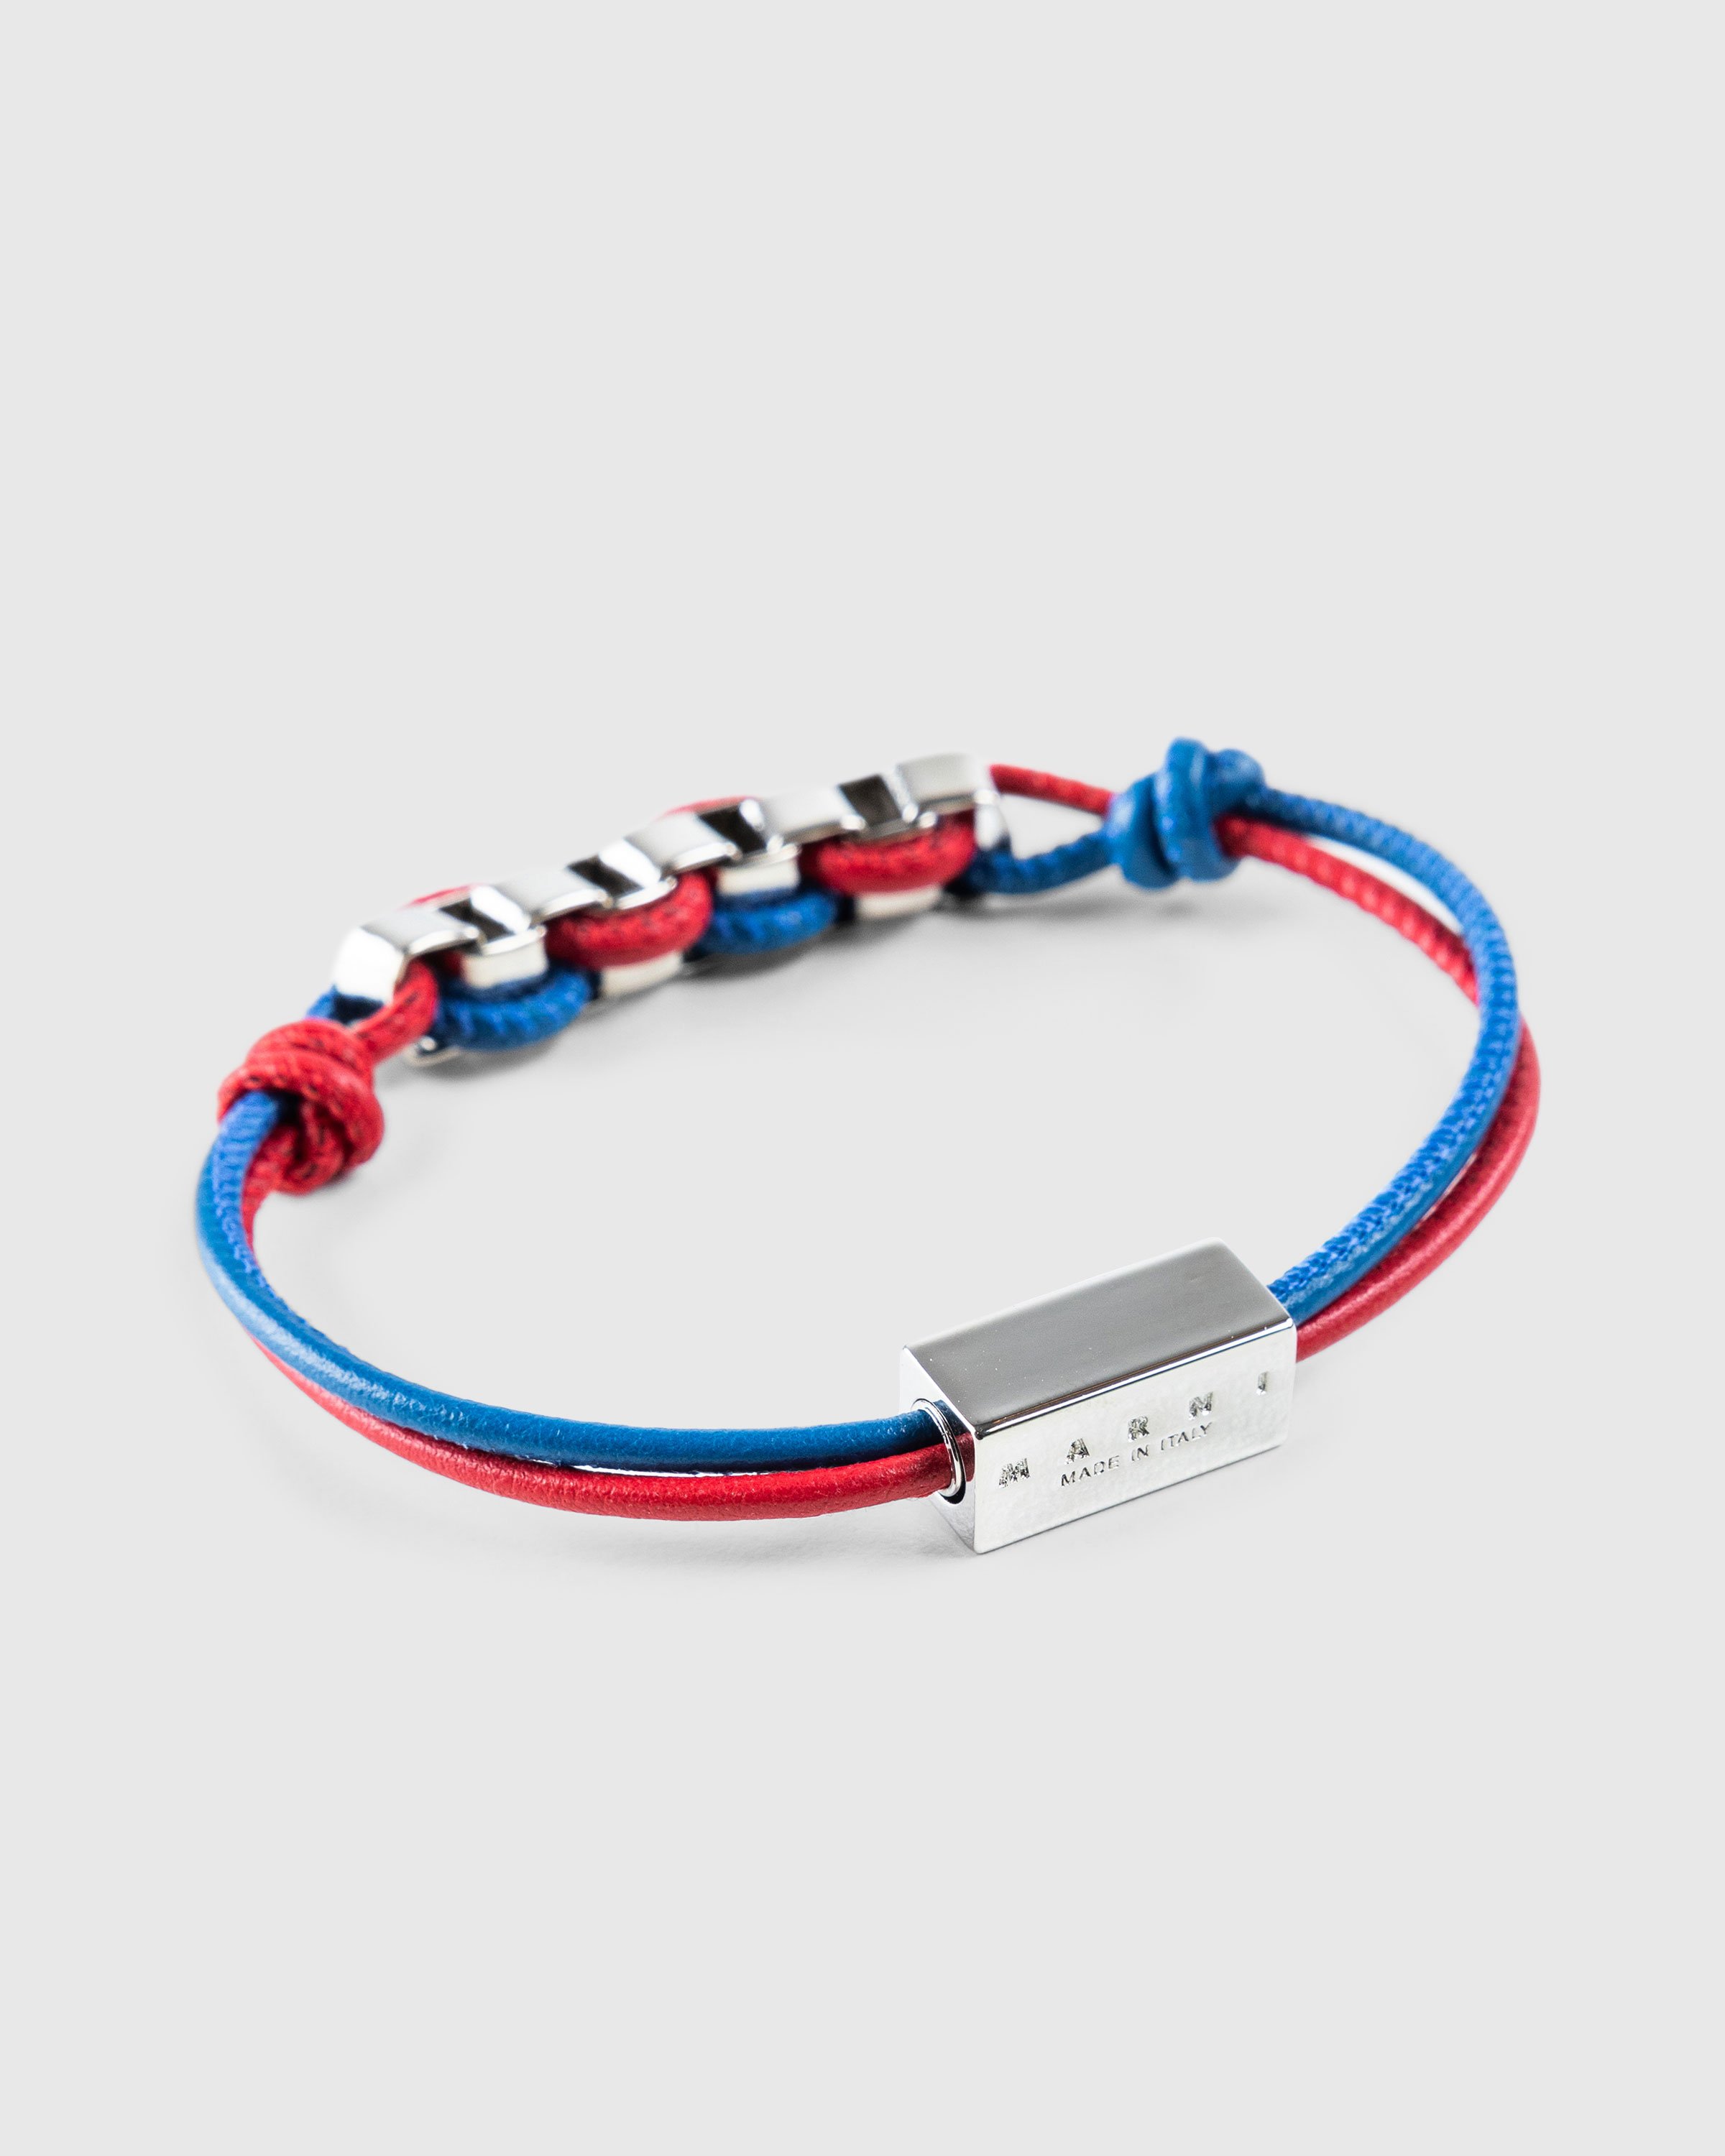 Marni - Logo Chain Leather Bracelet Red/Ocean - Accessories - Multi - Image 3